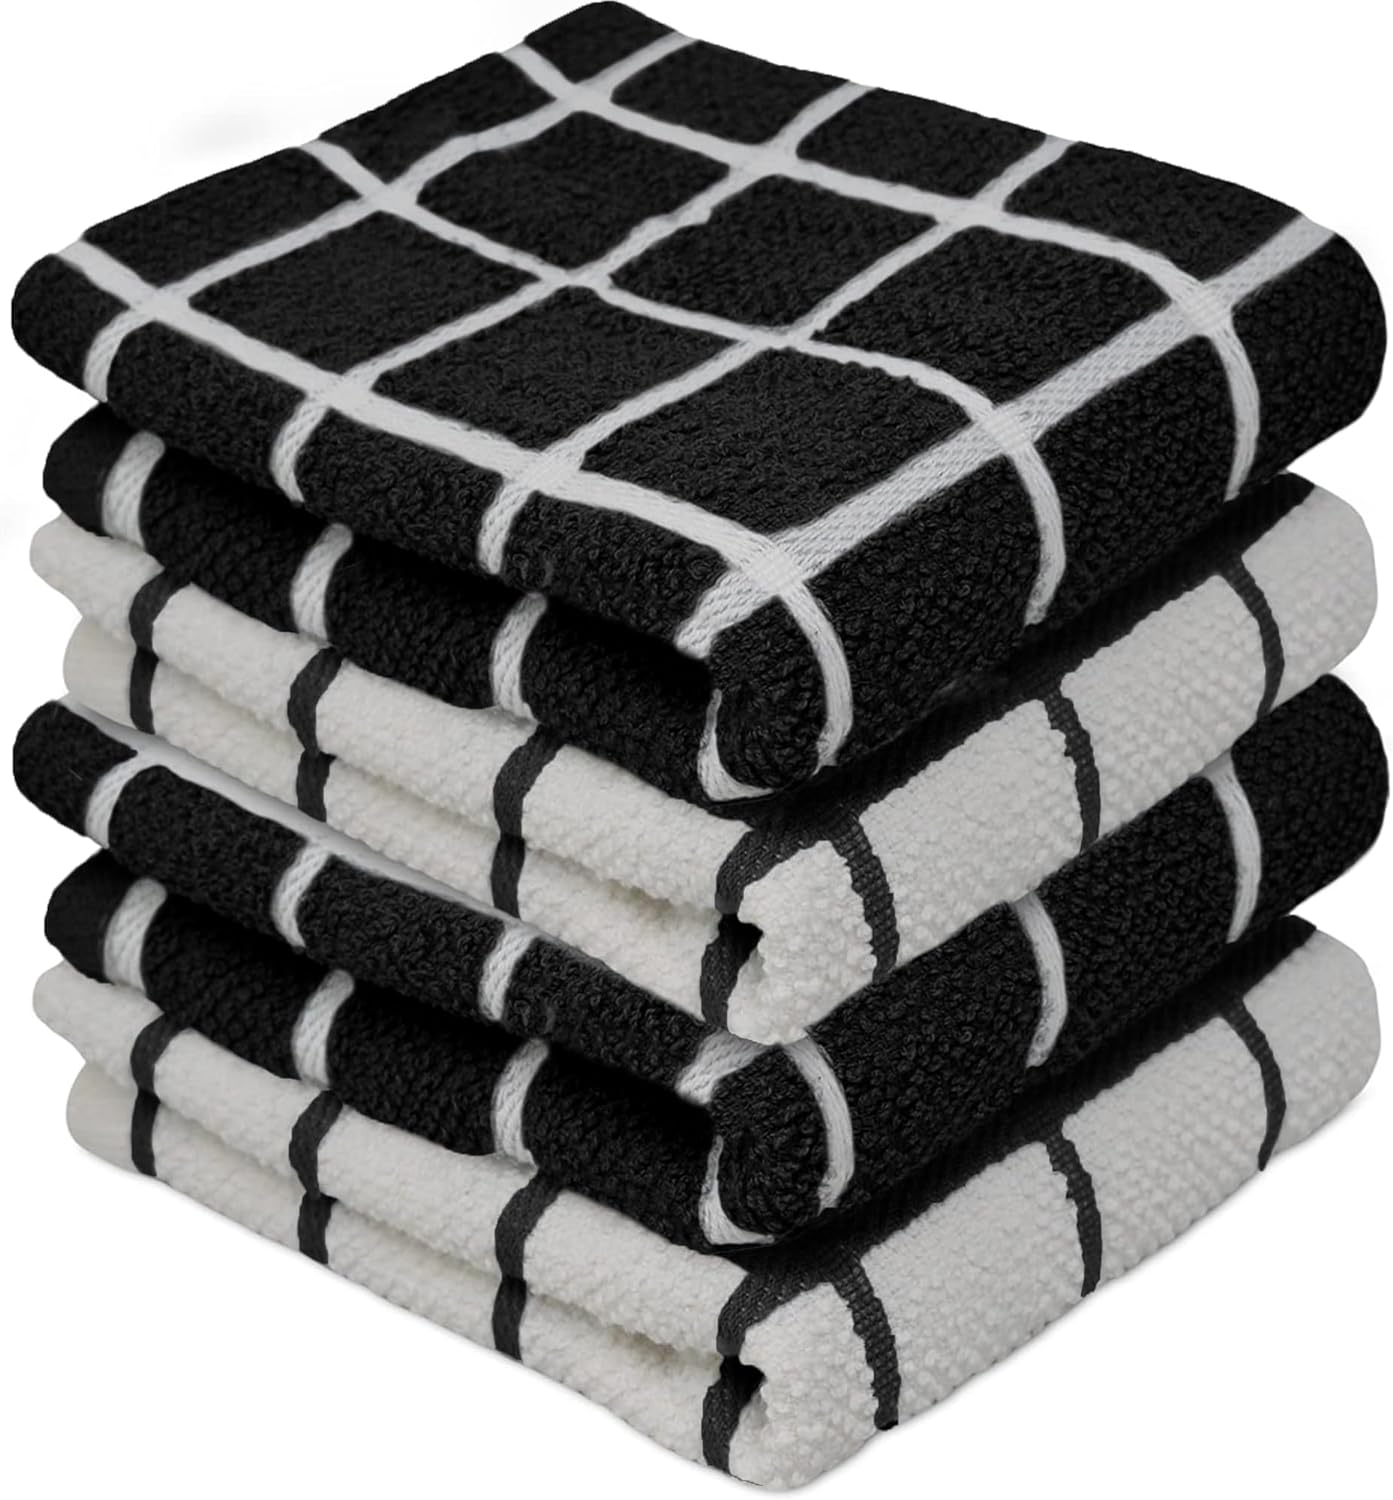 [100% Egyptian Cotton Hand Towels Flannel Washcloth Sports Gym Spa | Towelogy] - Towelogy